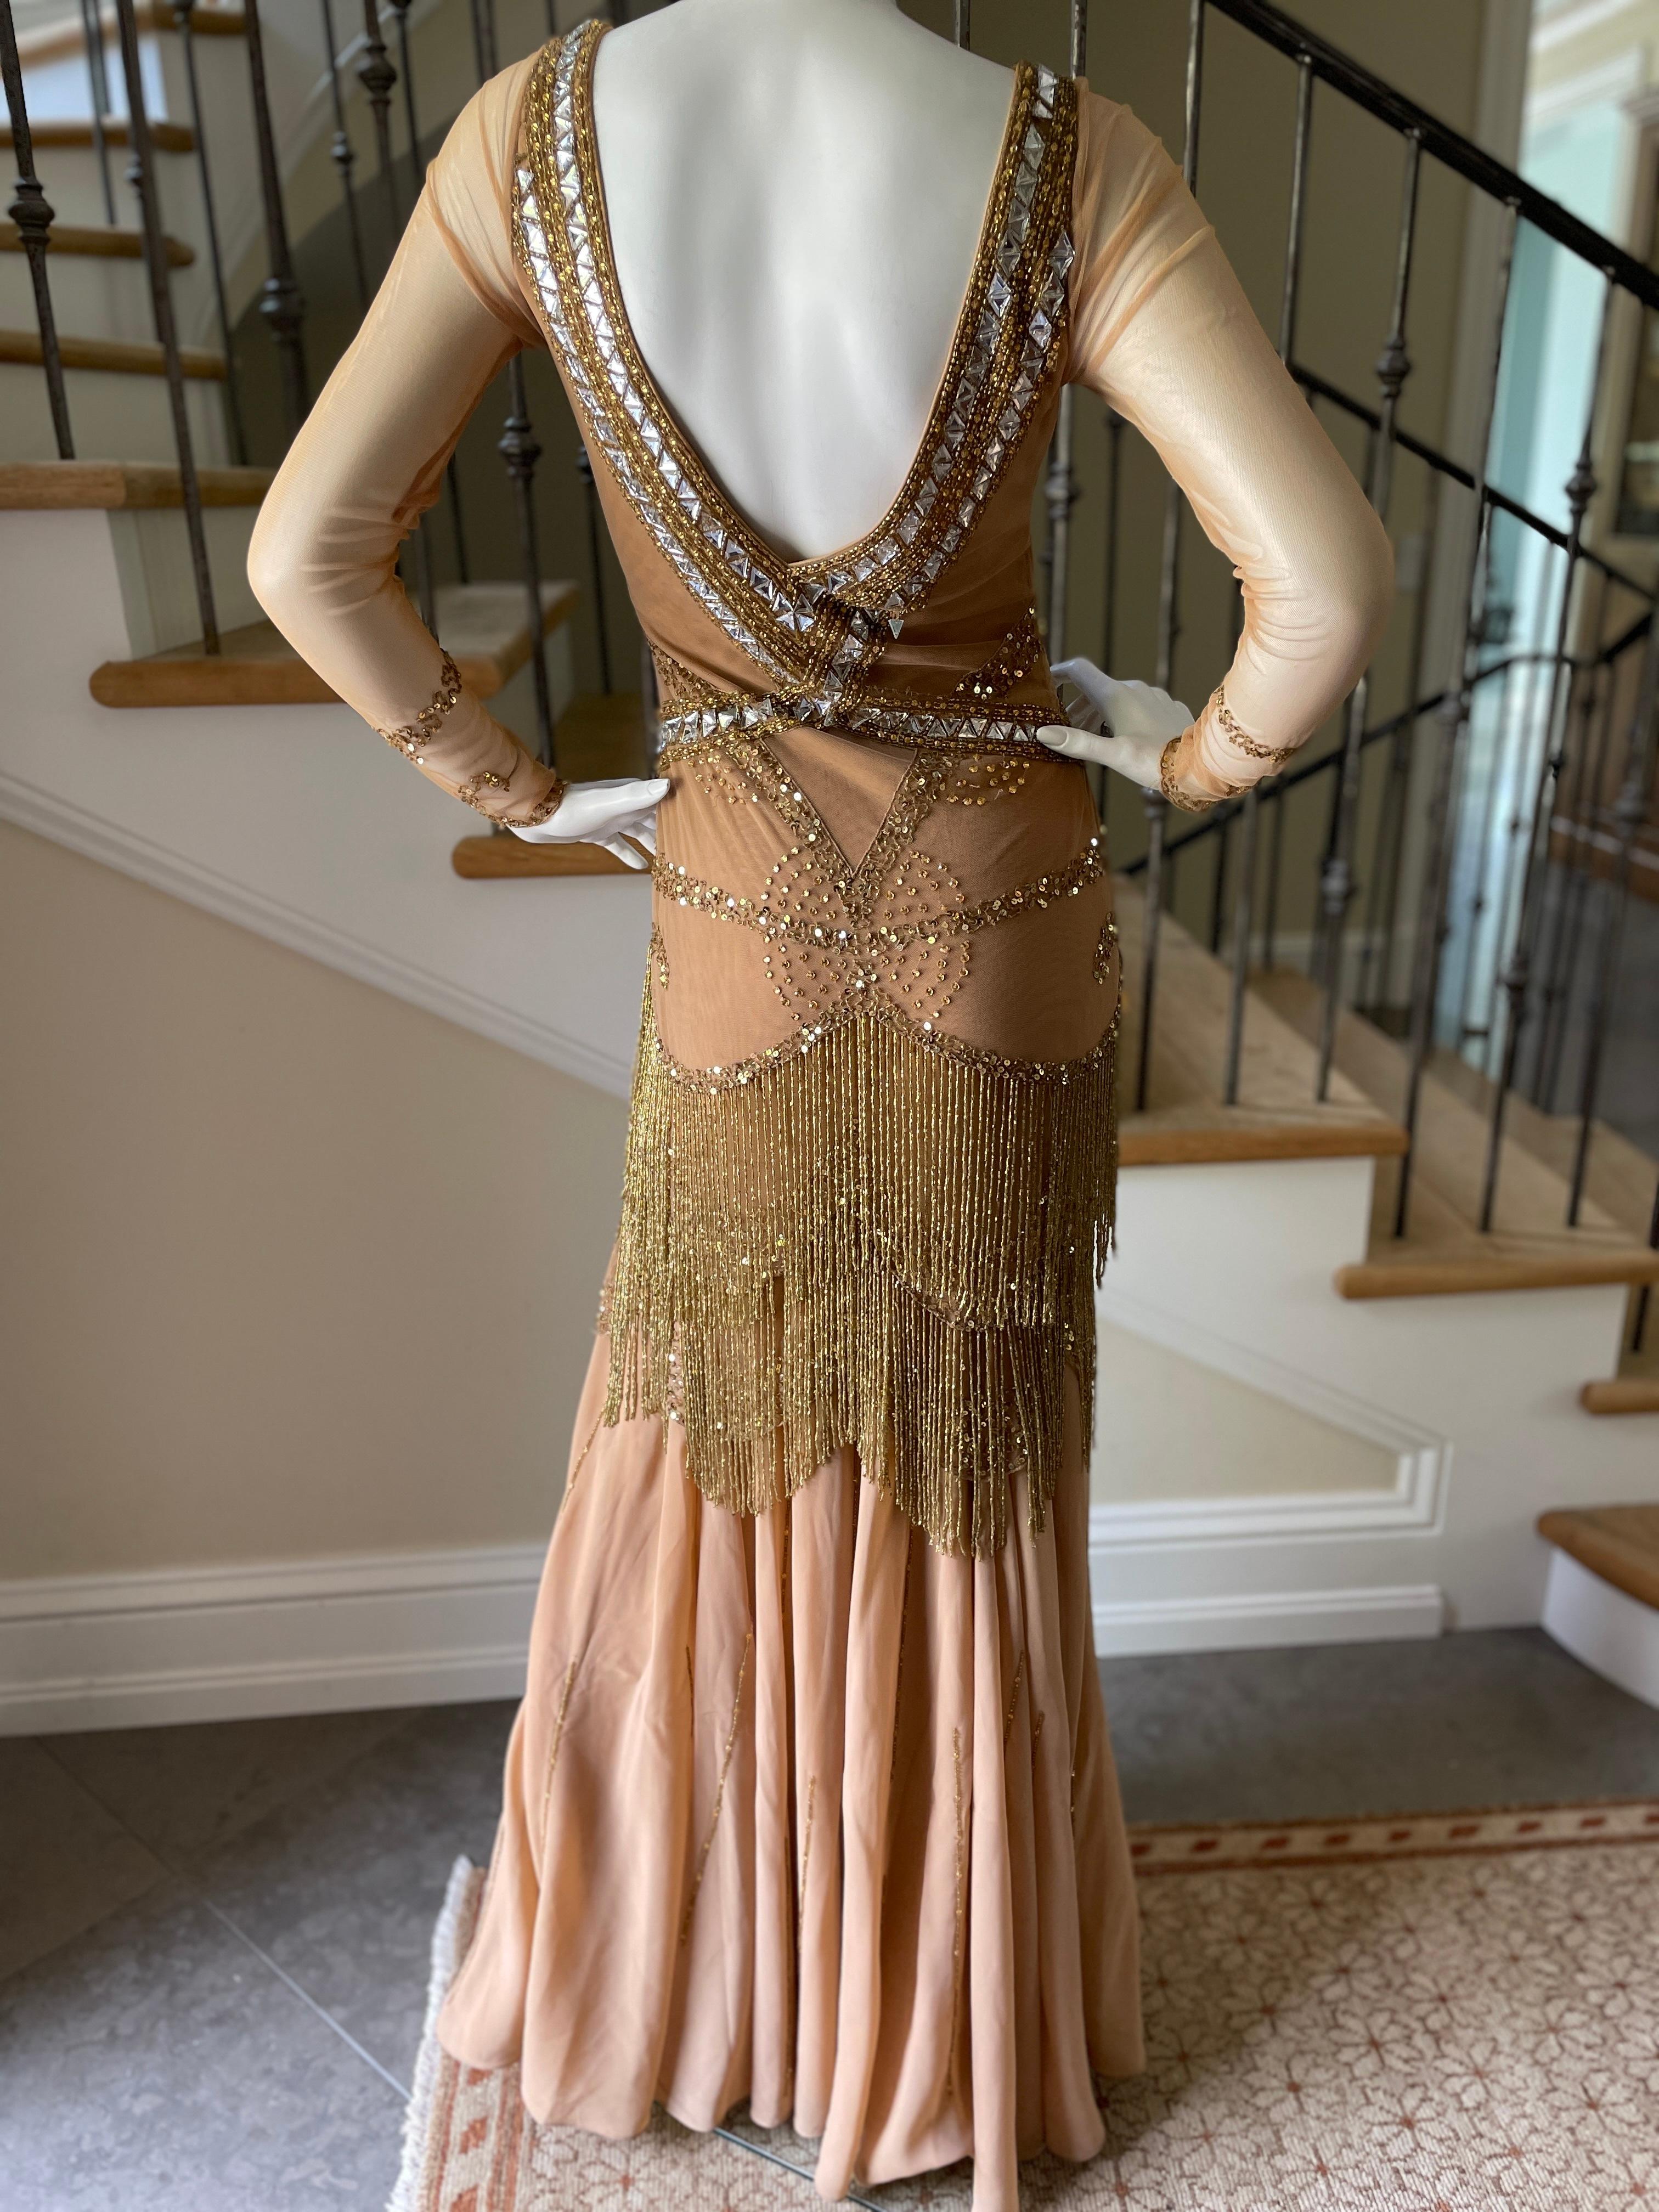 Class Cavalli Extravagantly Jeweled Vintage Evening Dress with Beaded Fringe For Sale 1